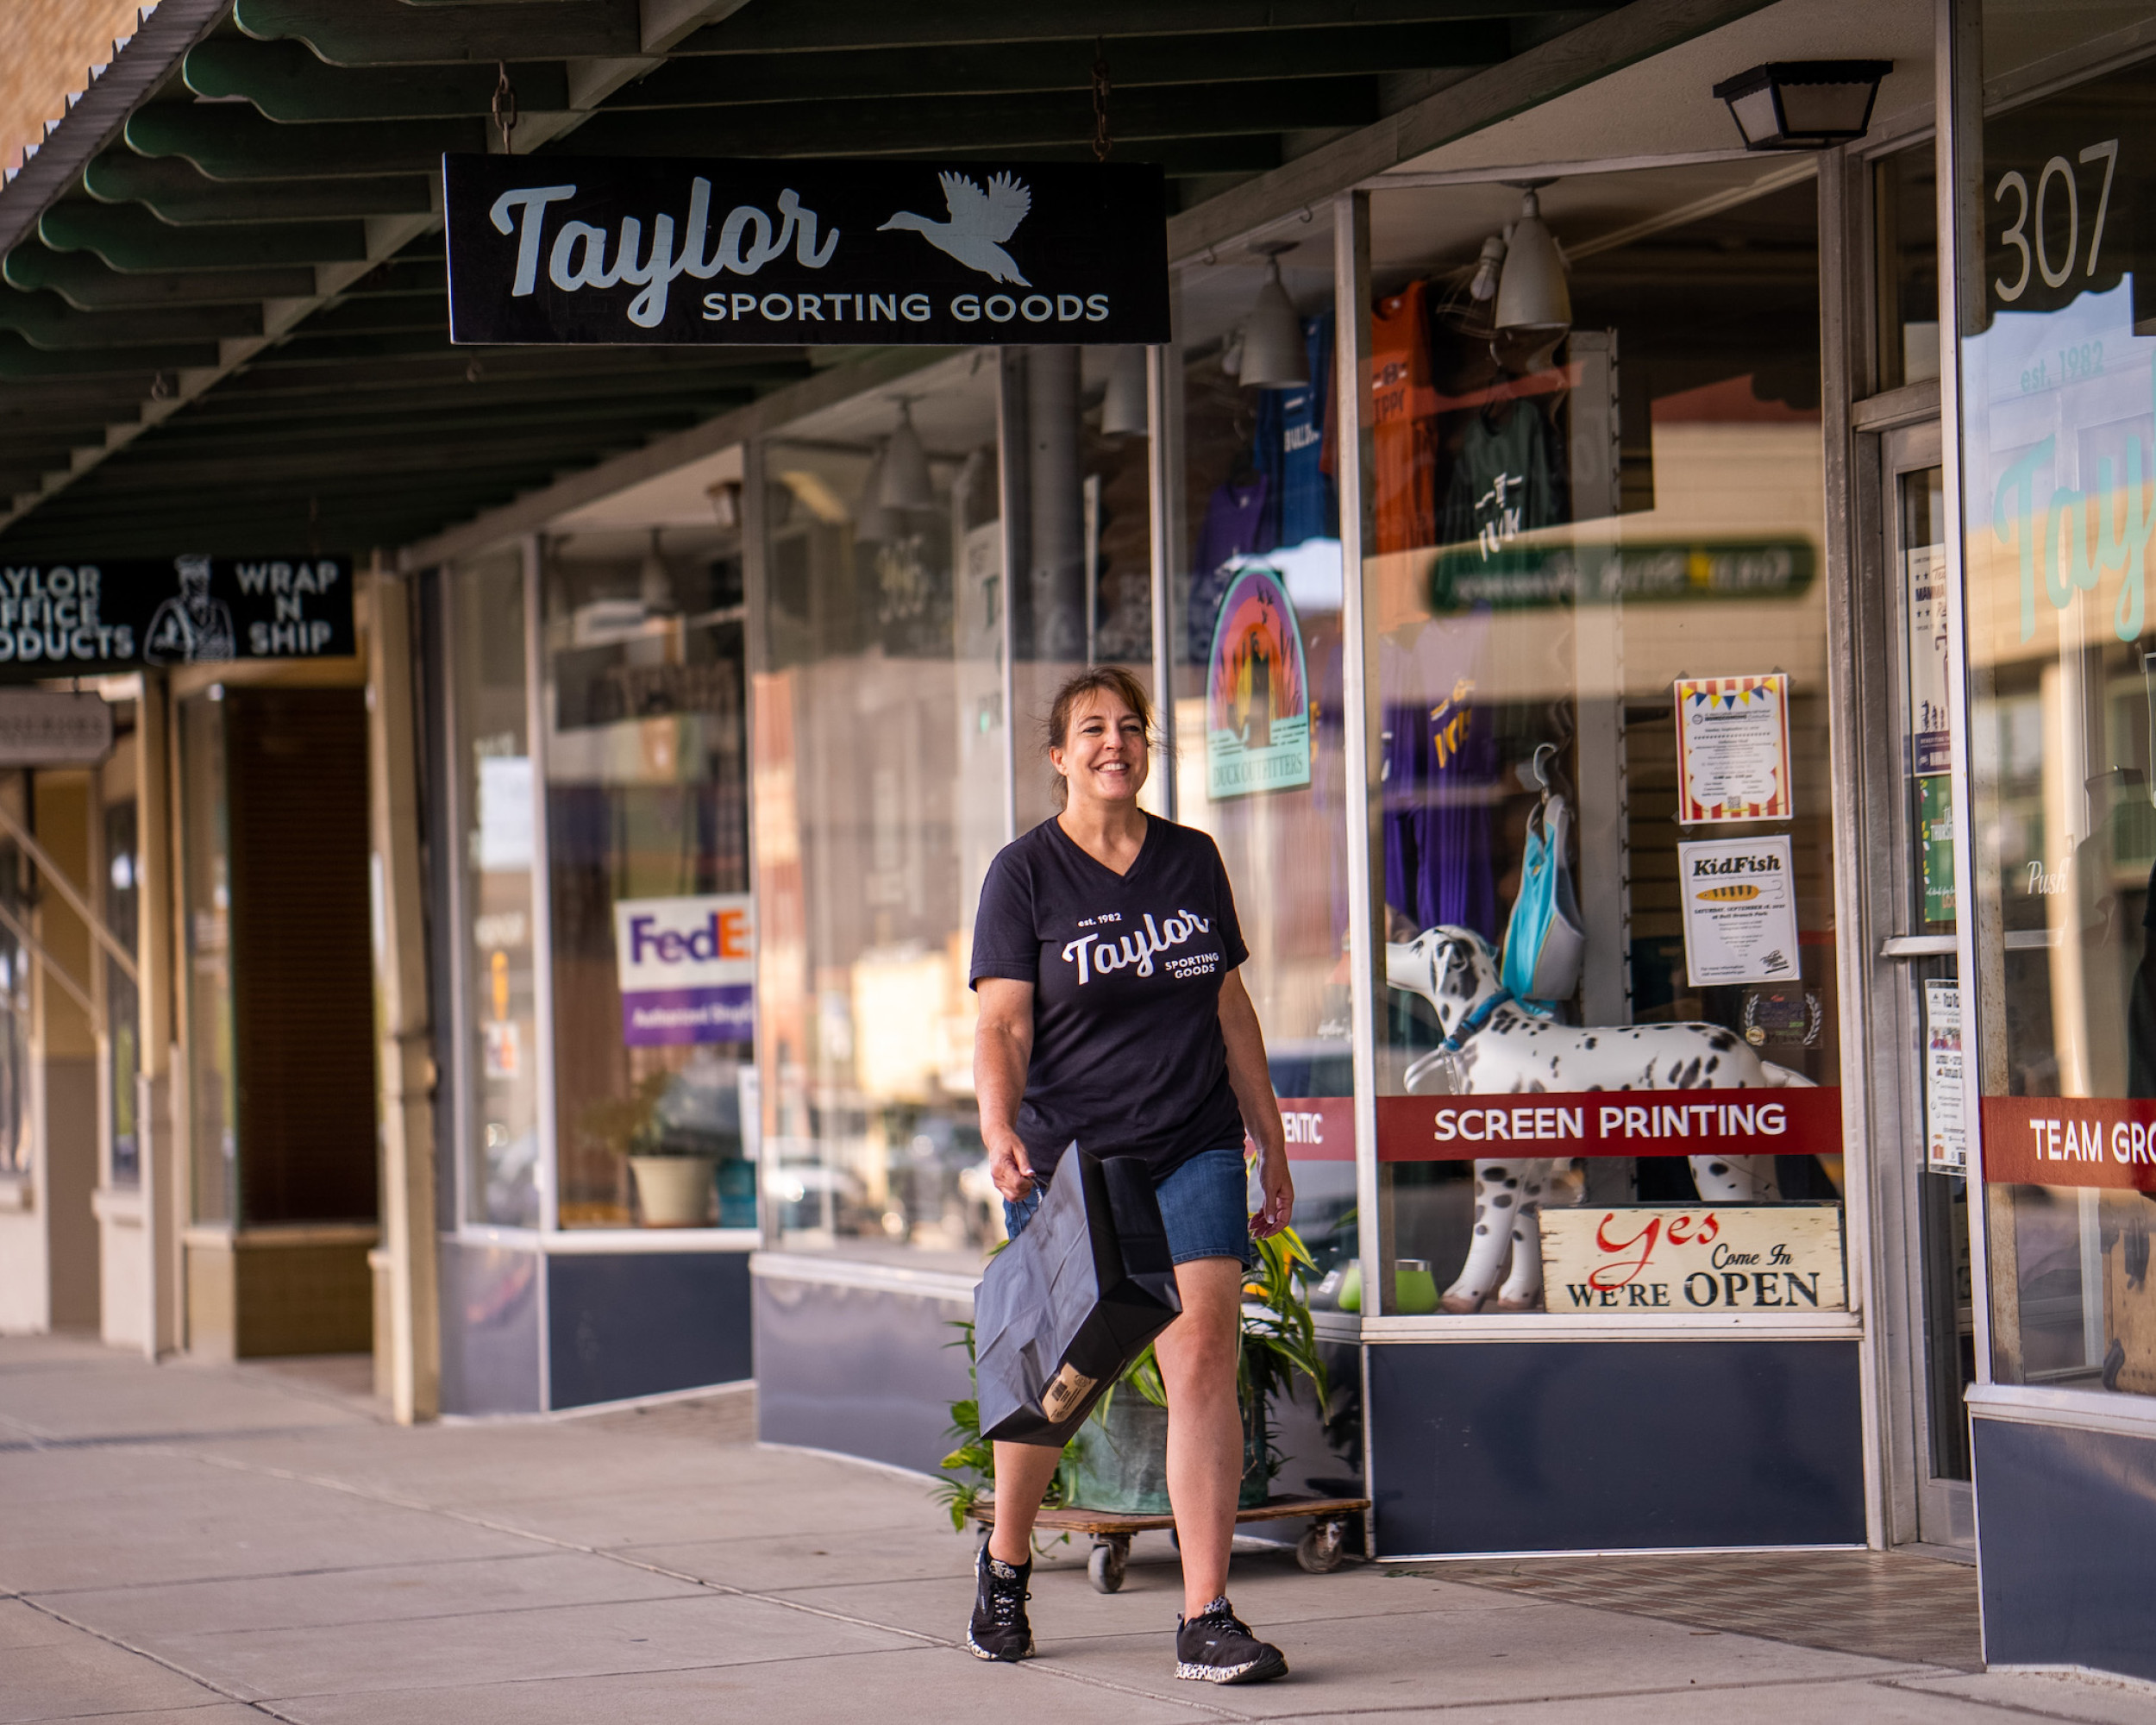 A woman walking in front of the Taylor Sporting Goods store